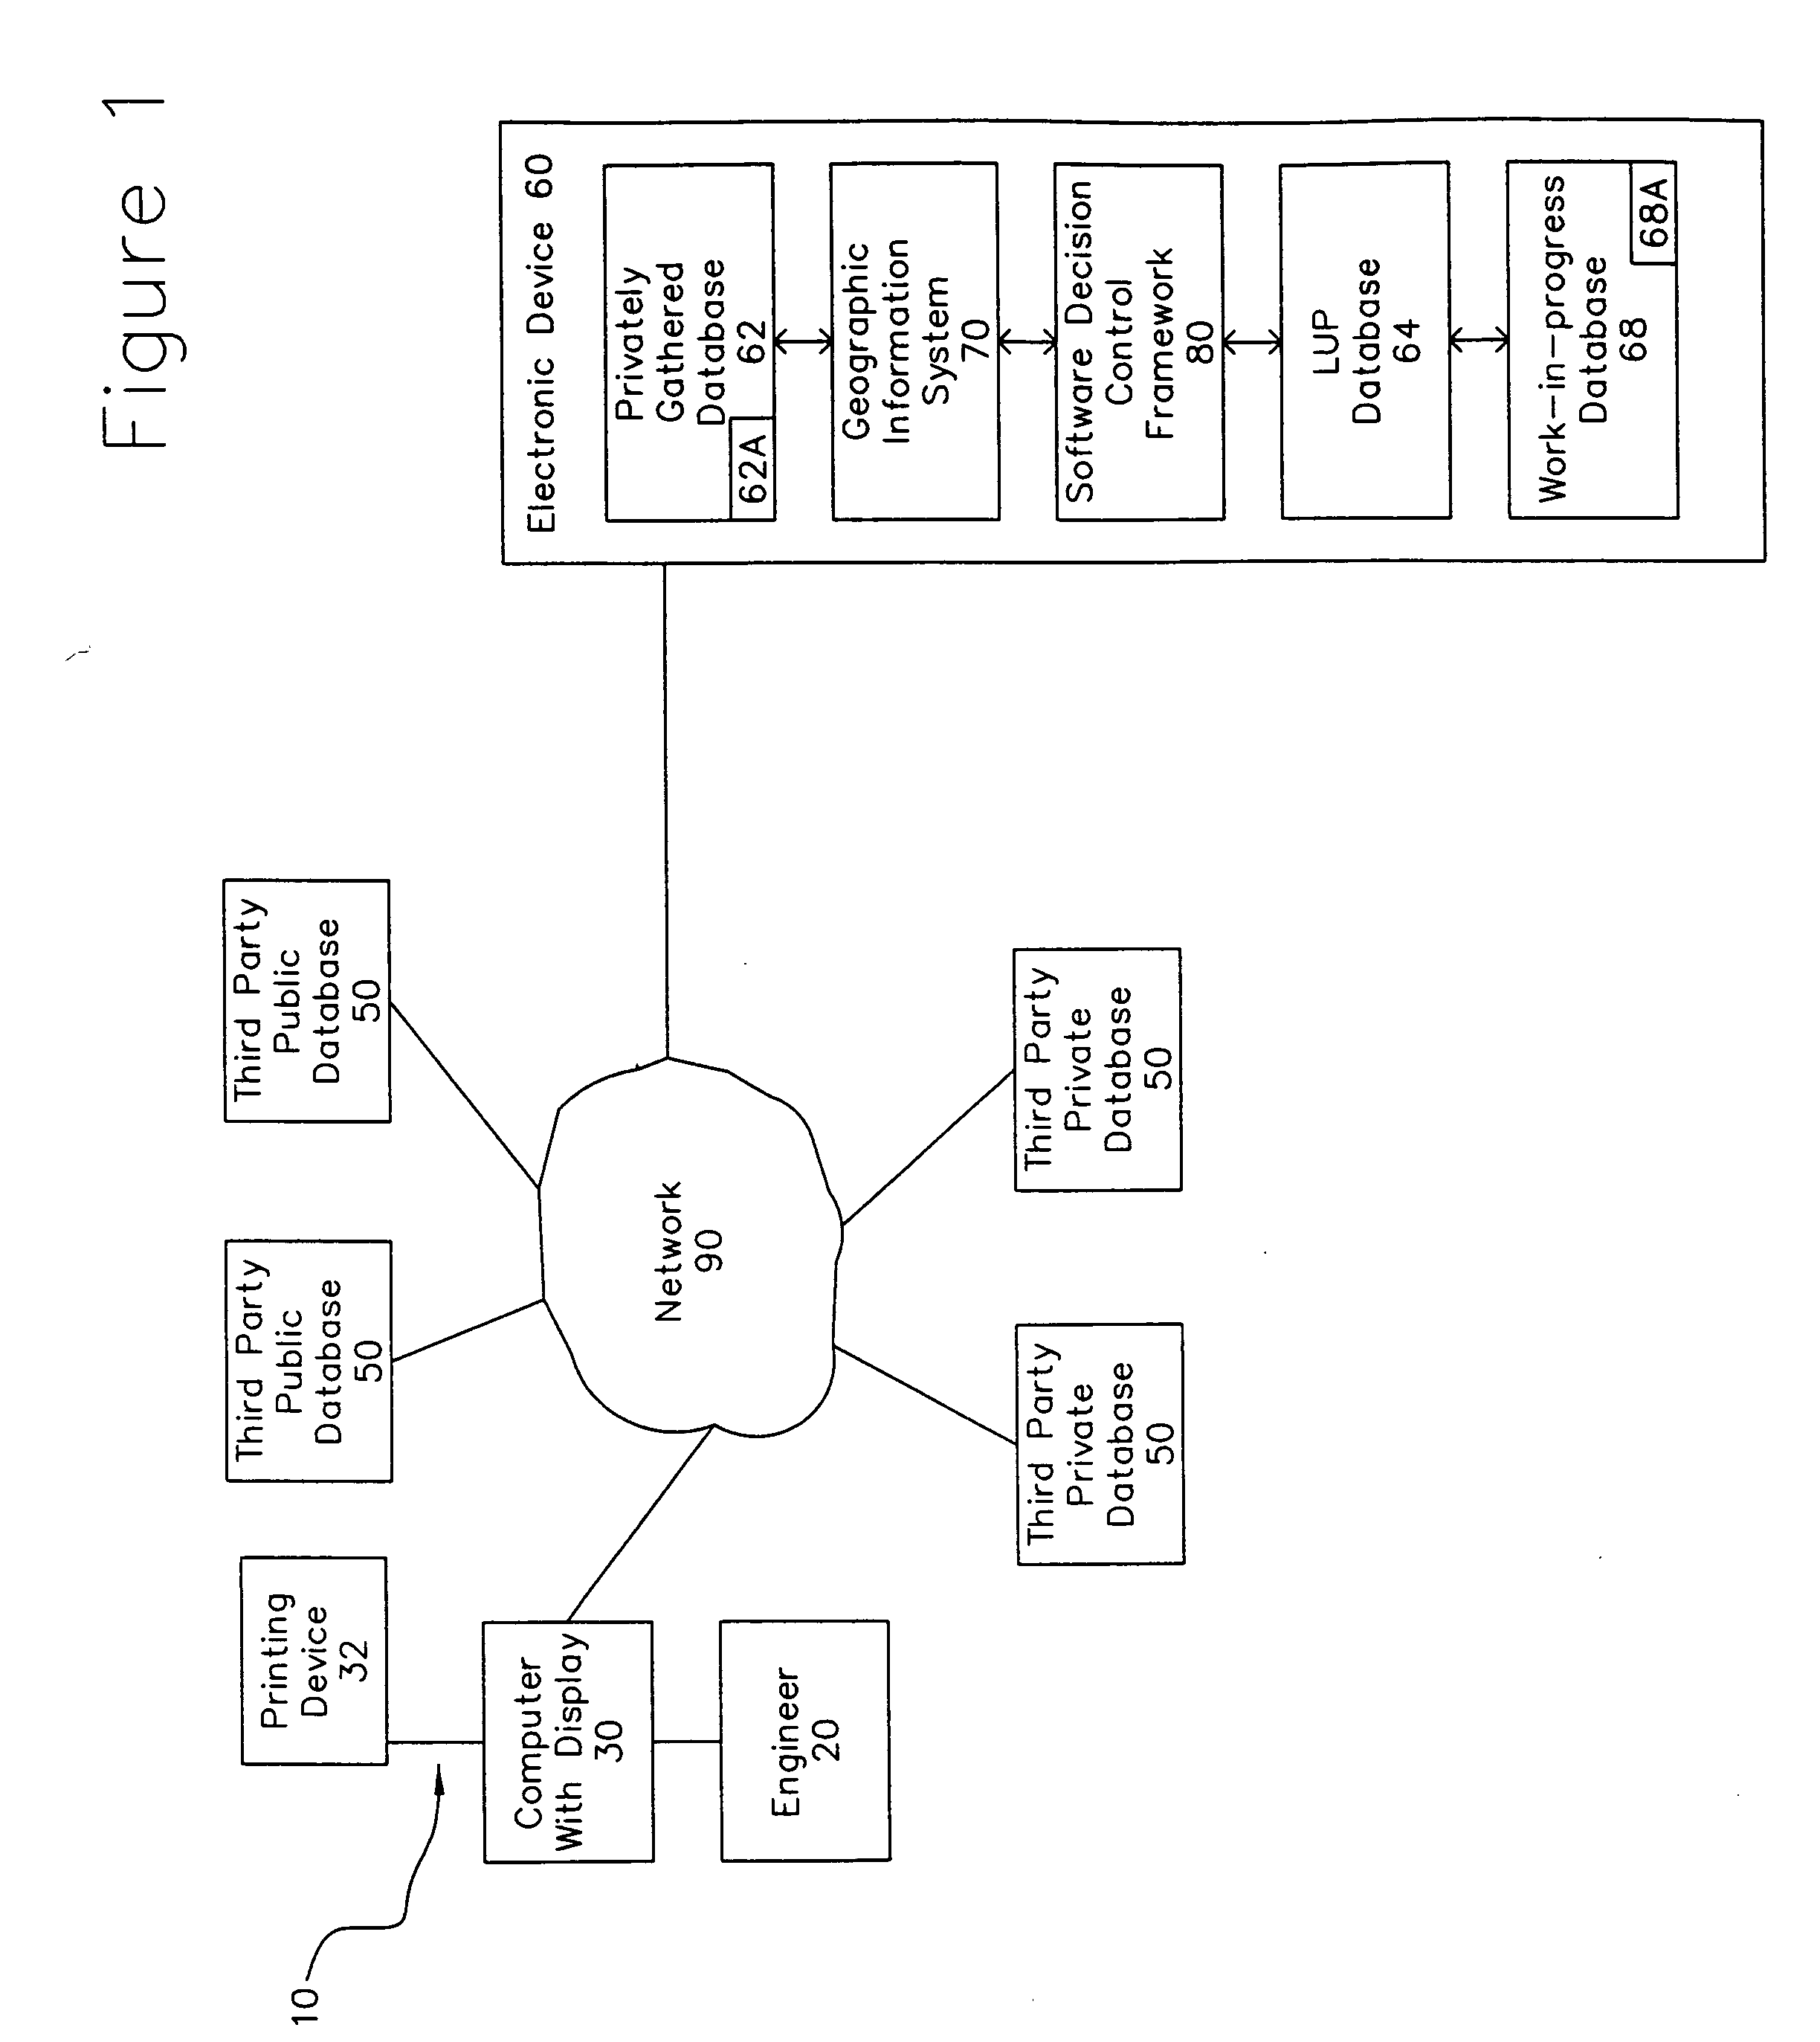 Process, system, or method for the determination of the percentage of area of a parcel of land available for development or preservation and the production of a report and map therefor on a fixed tangible medium